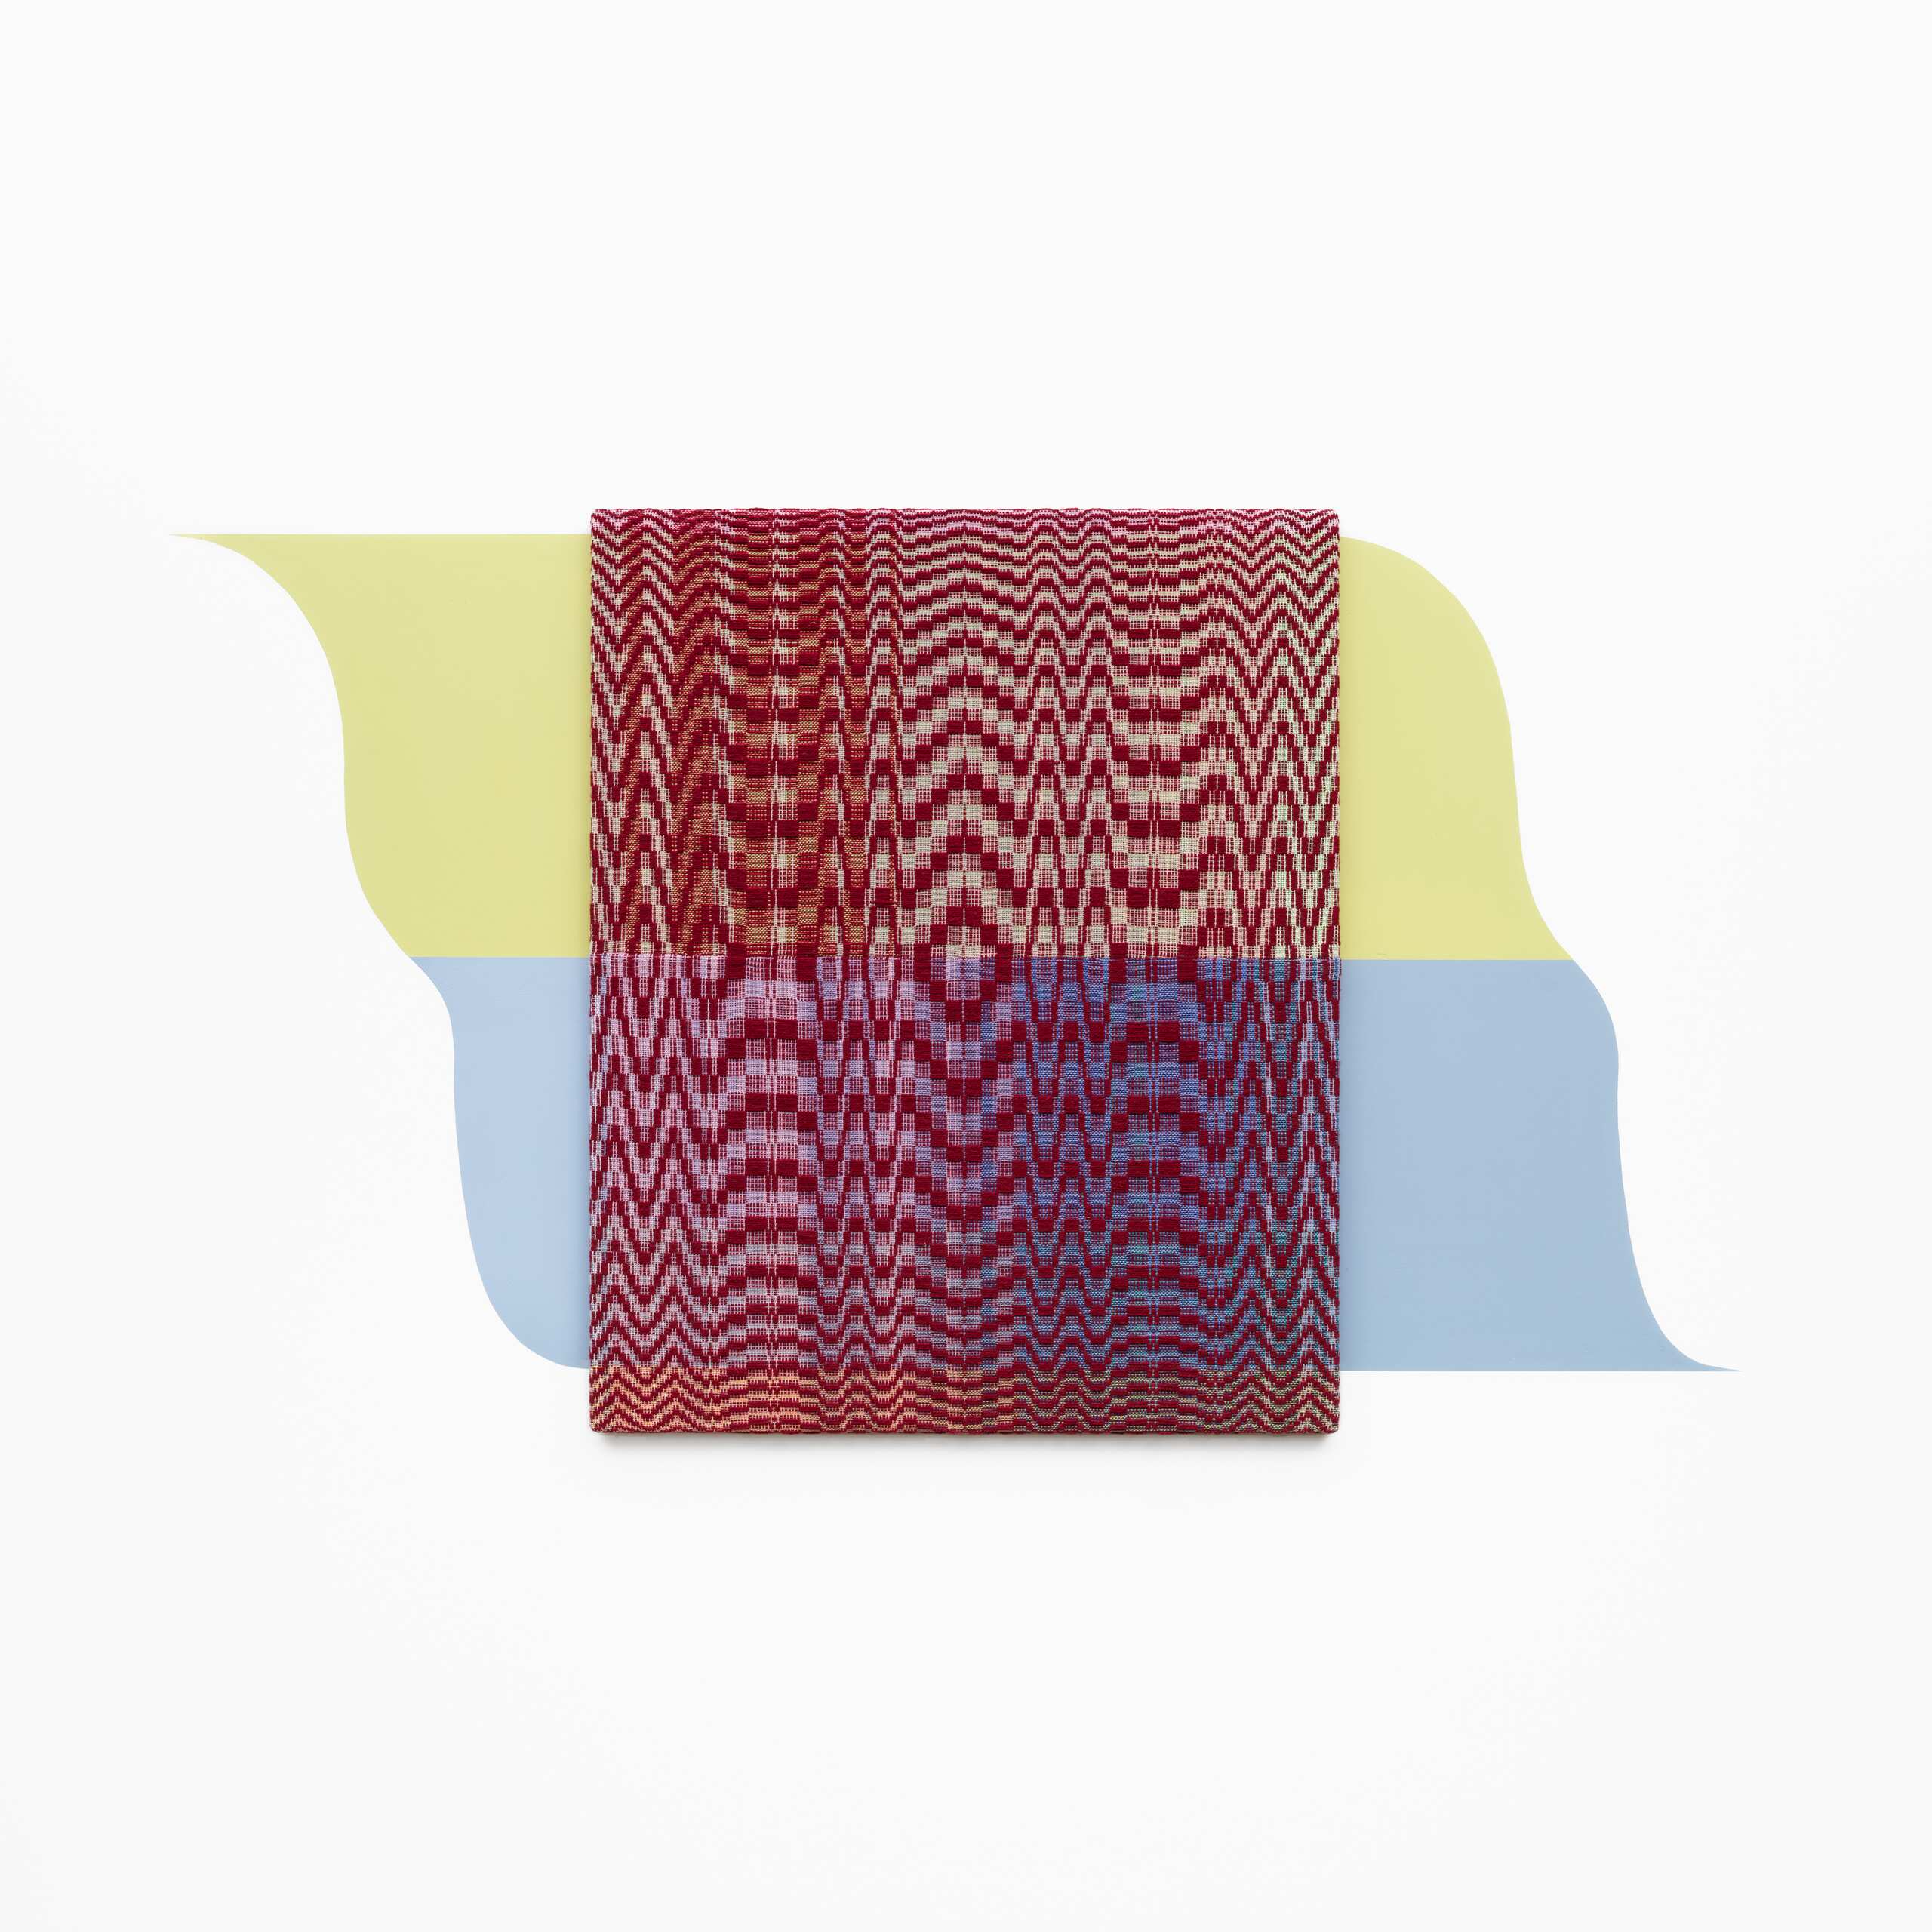 Energy field [maroon], Hand-woven cotton and wool yarn, house paint, 2023